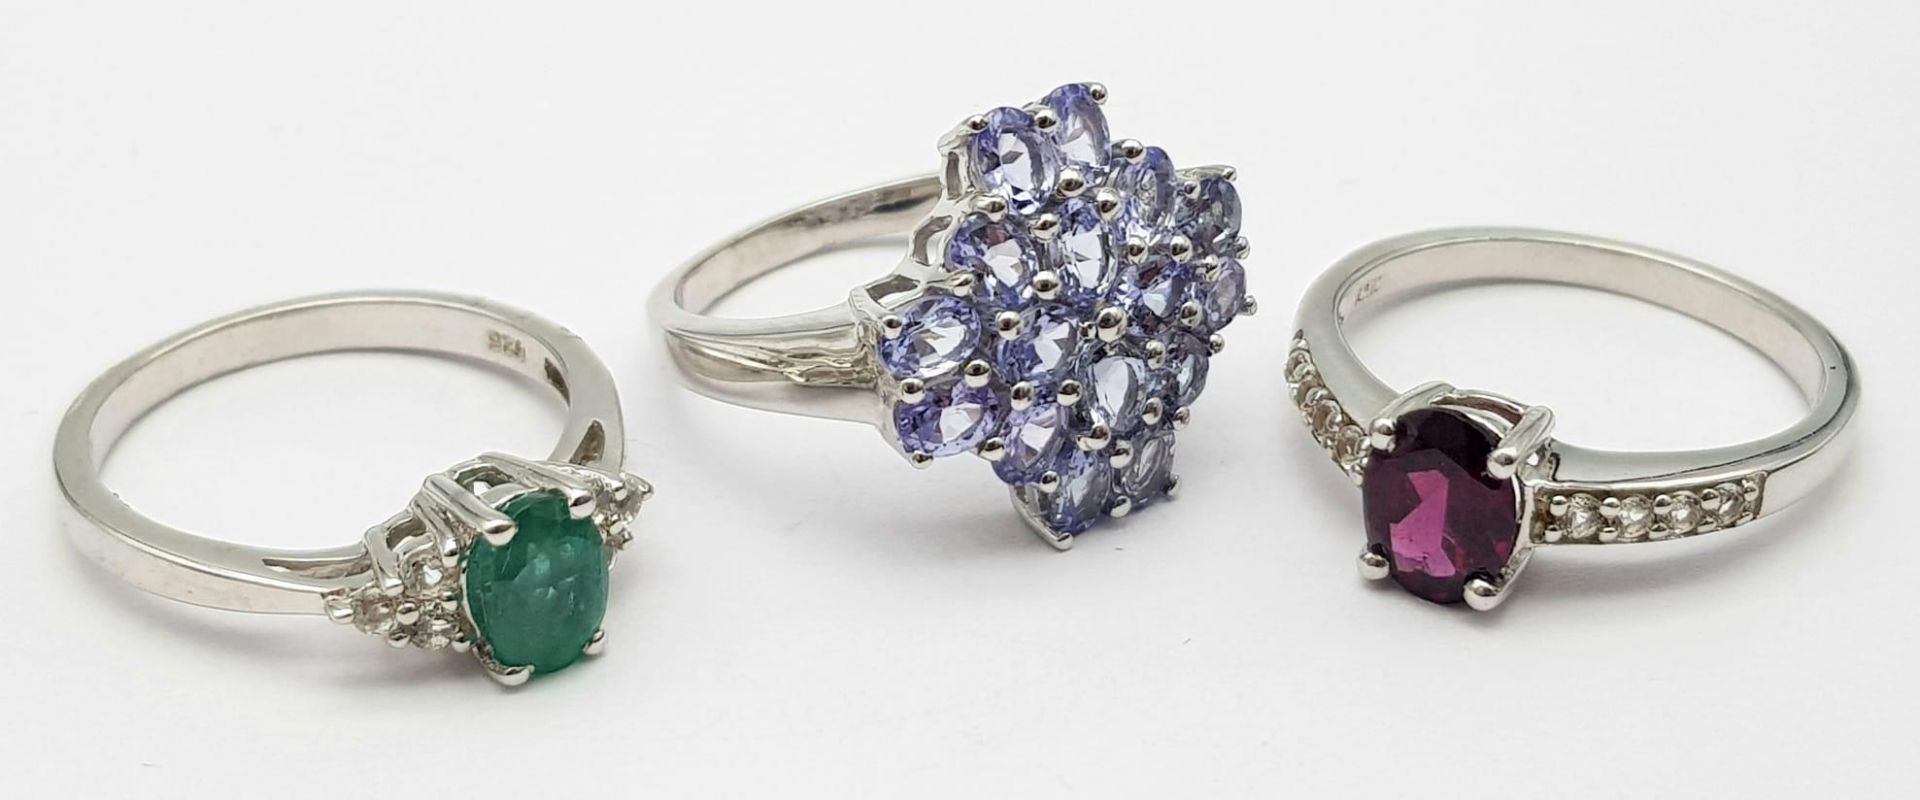 Three 925 Sterling Silver Gemstone Rings: Garnet - Size R, Amethyst - Size P and Emerald - Size P. - Image 3 of 13